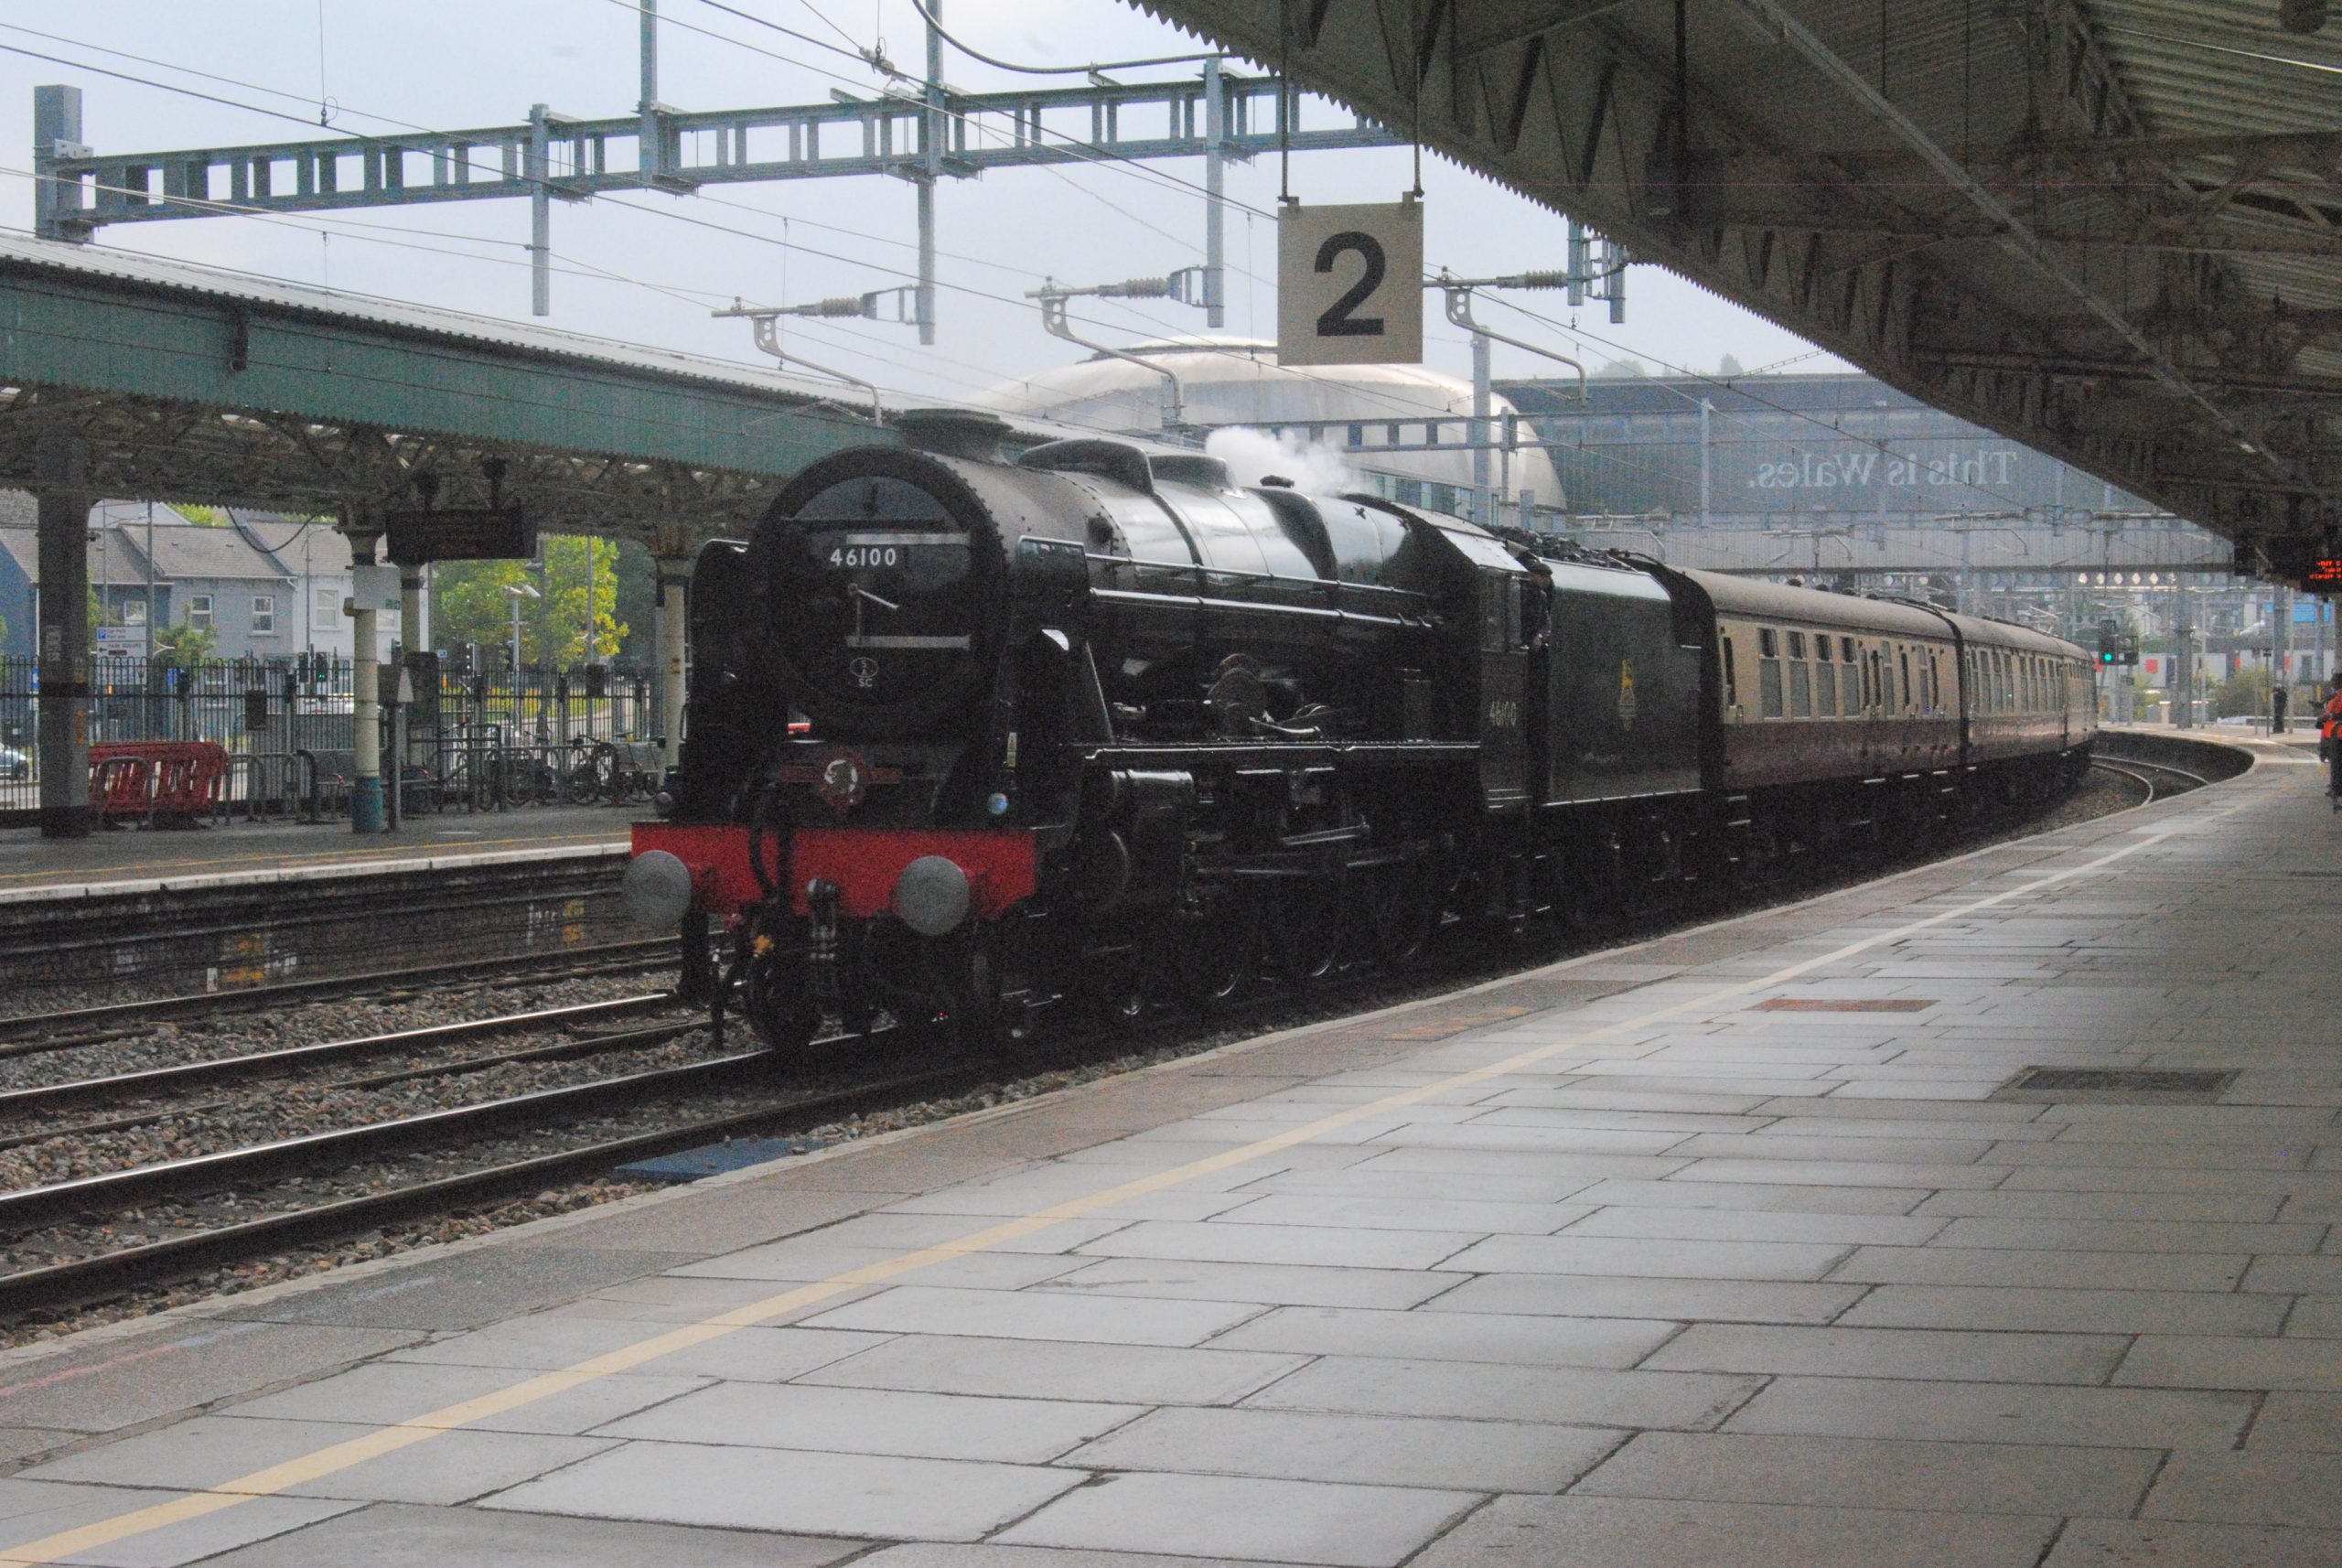 ....and later steaming through Newport - Image Credit : John Cashen